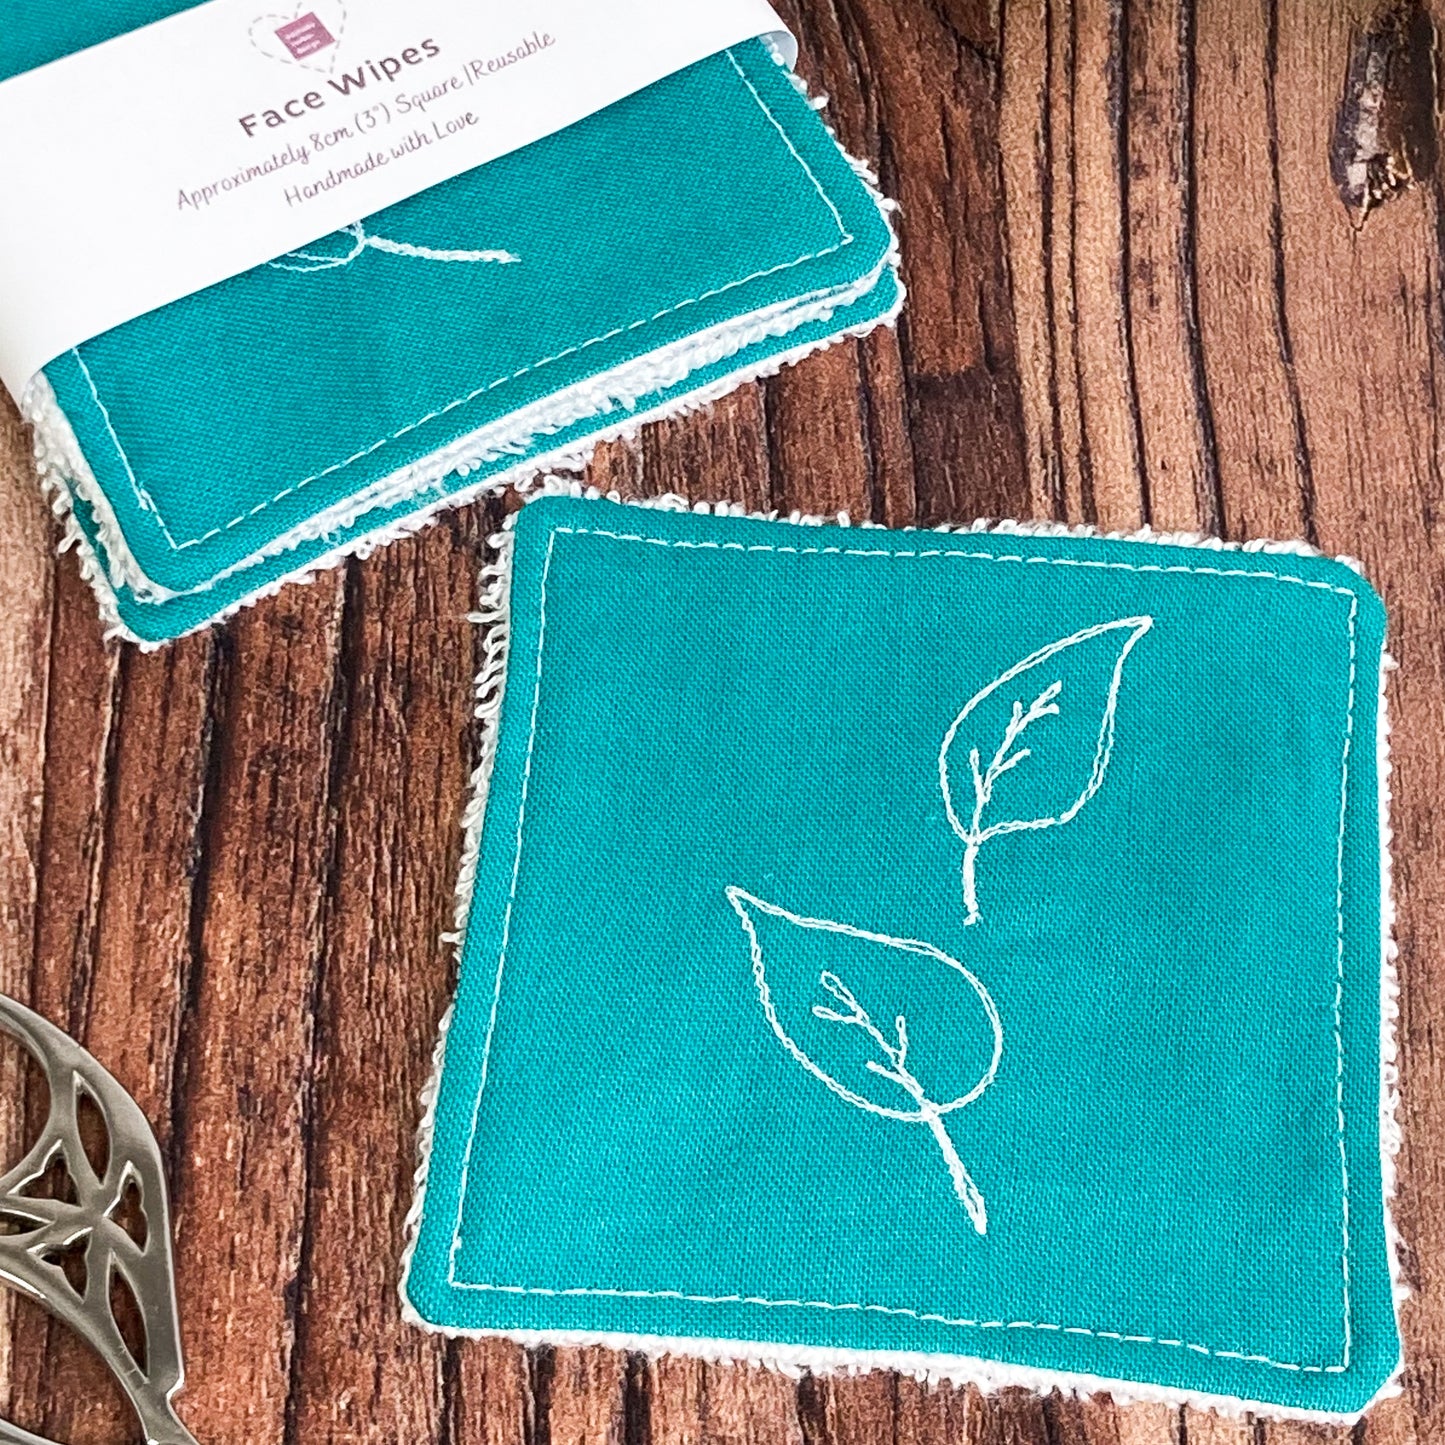 Embroidered Reusable Face Wipes